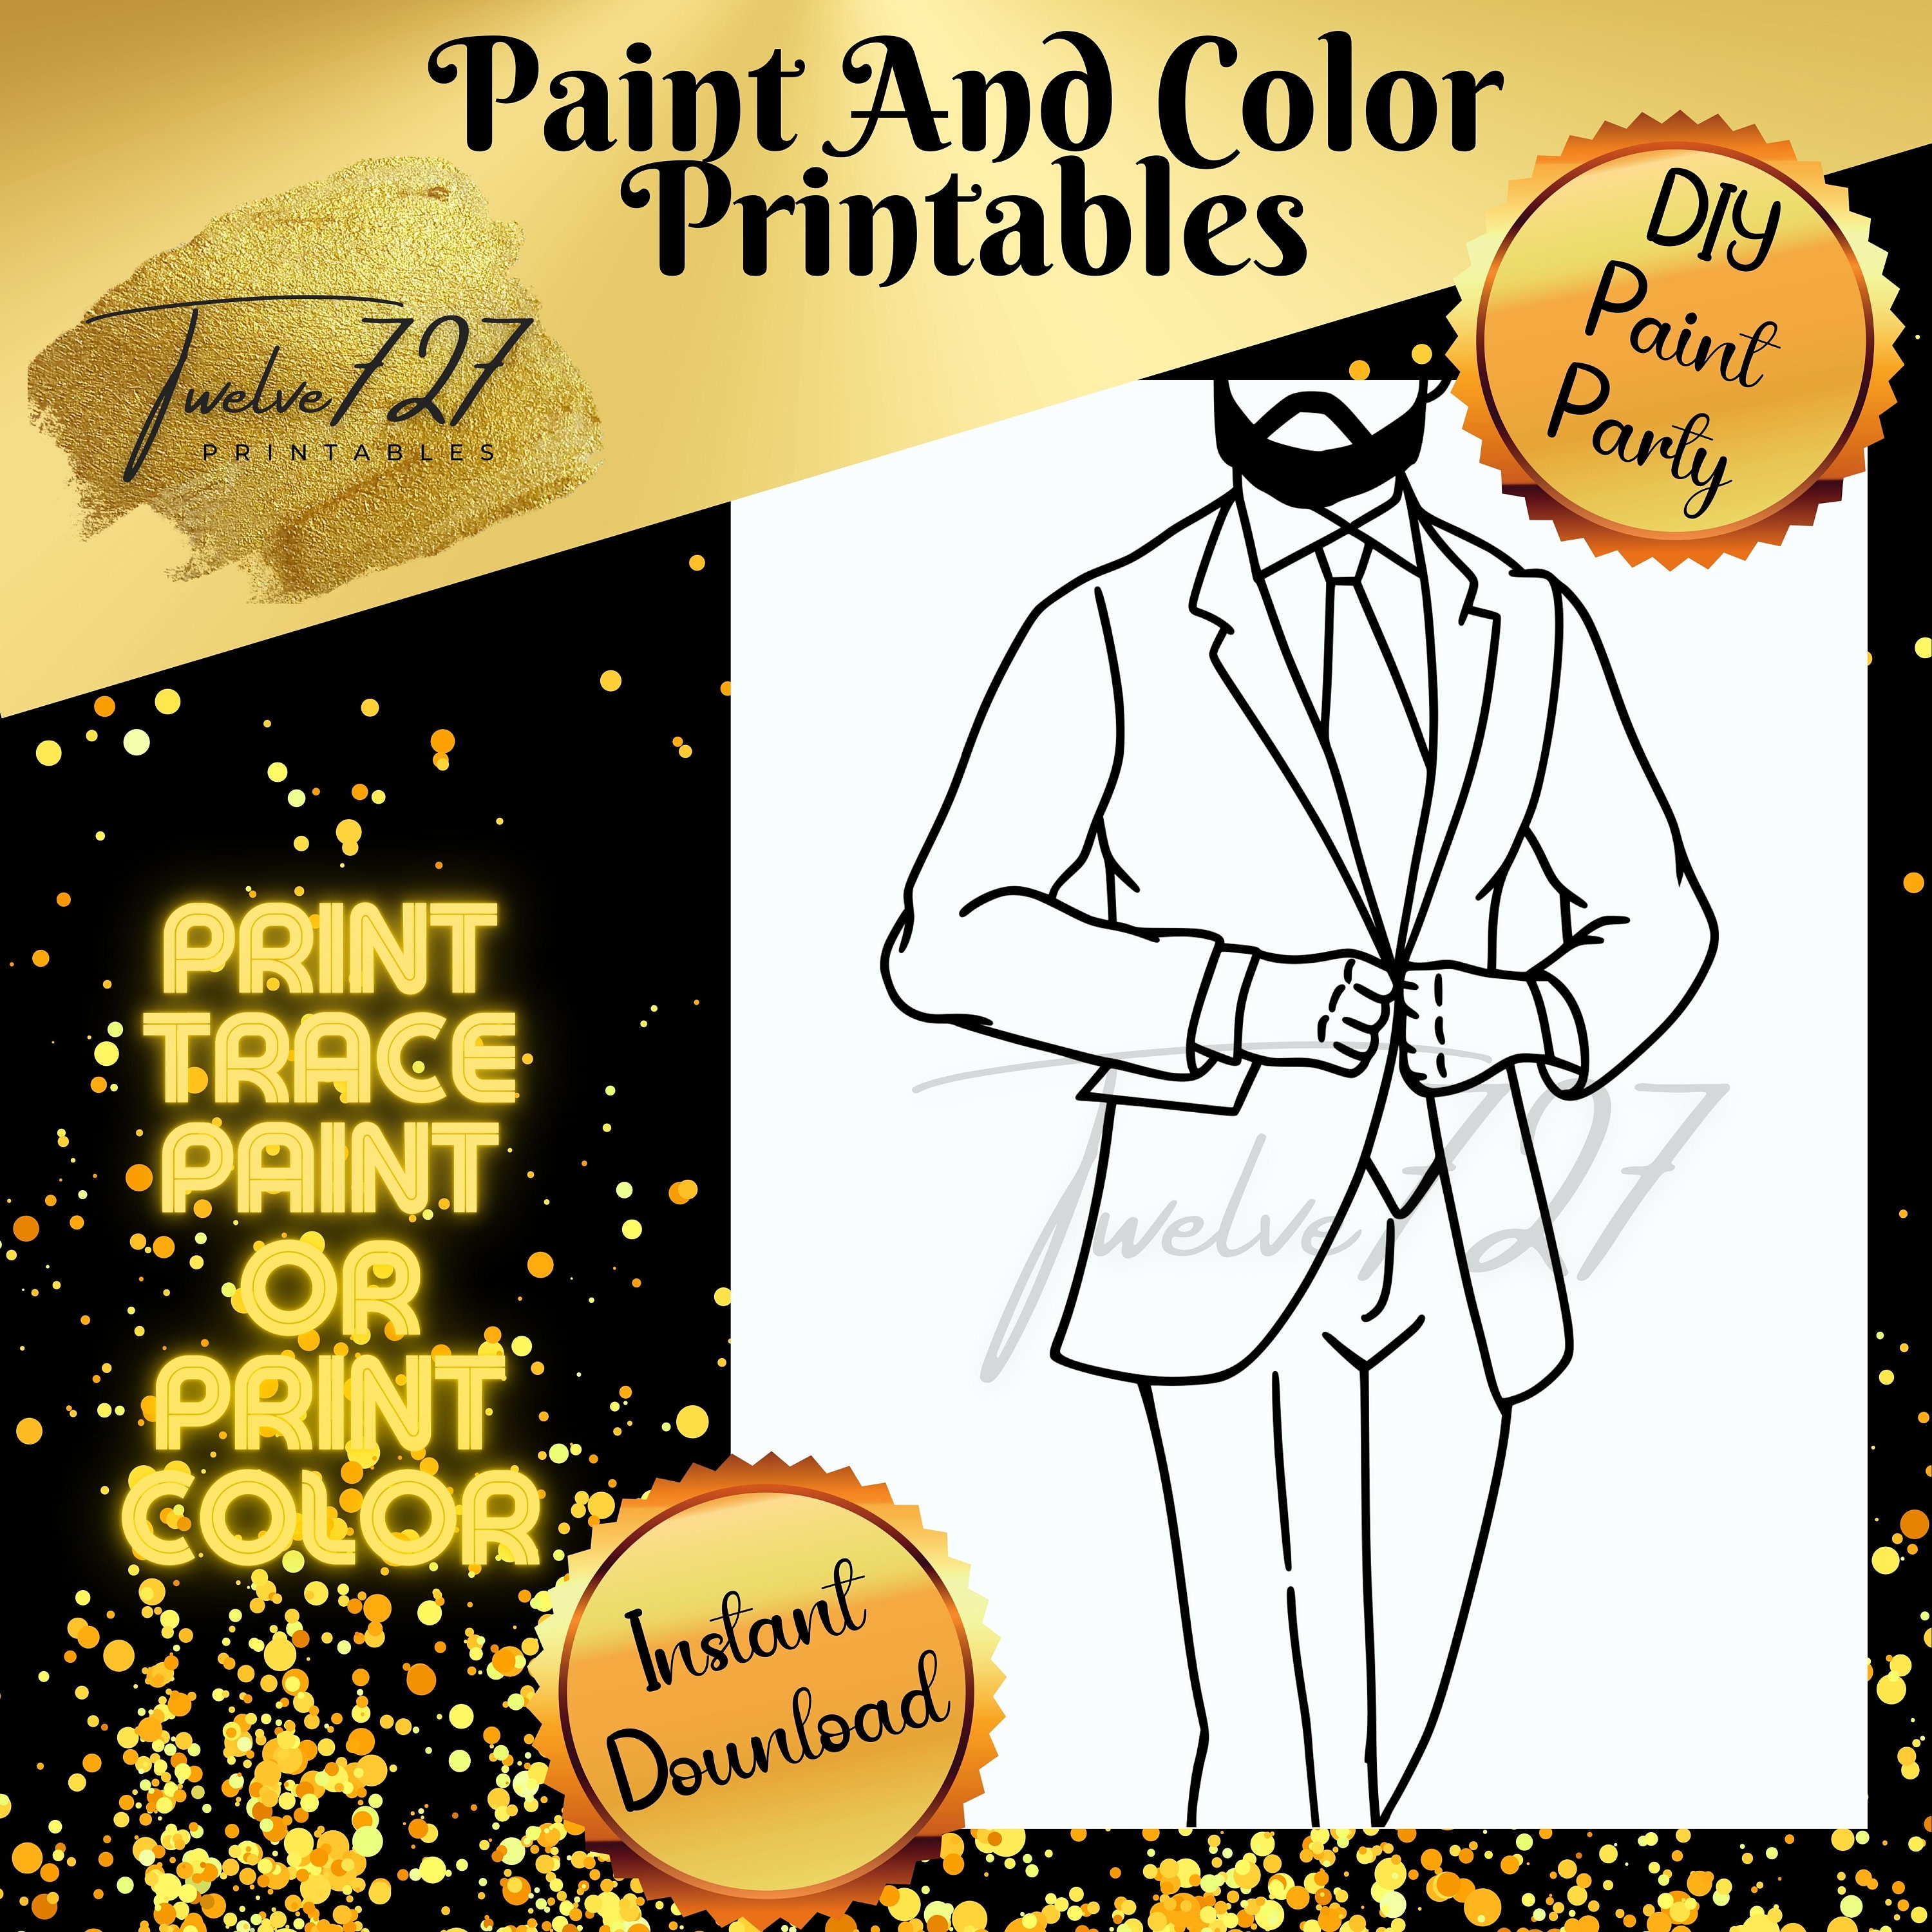 Cowboy Boots, Sip and Paint Kit, Pre Drawn Canvas, Paint and Sip Kit,  Couples Painting Kit, Adult Paint Kit 